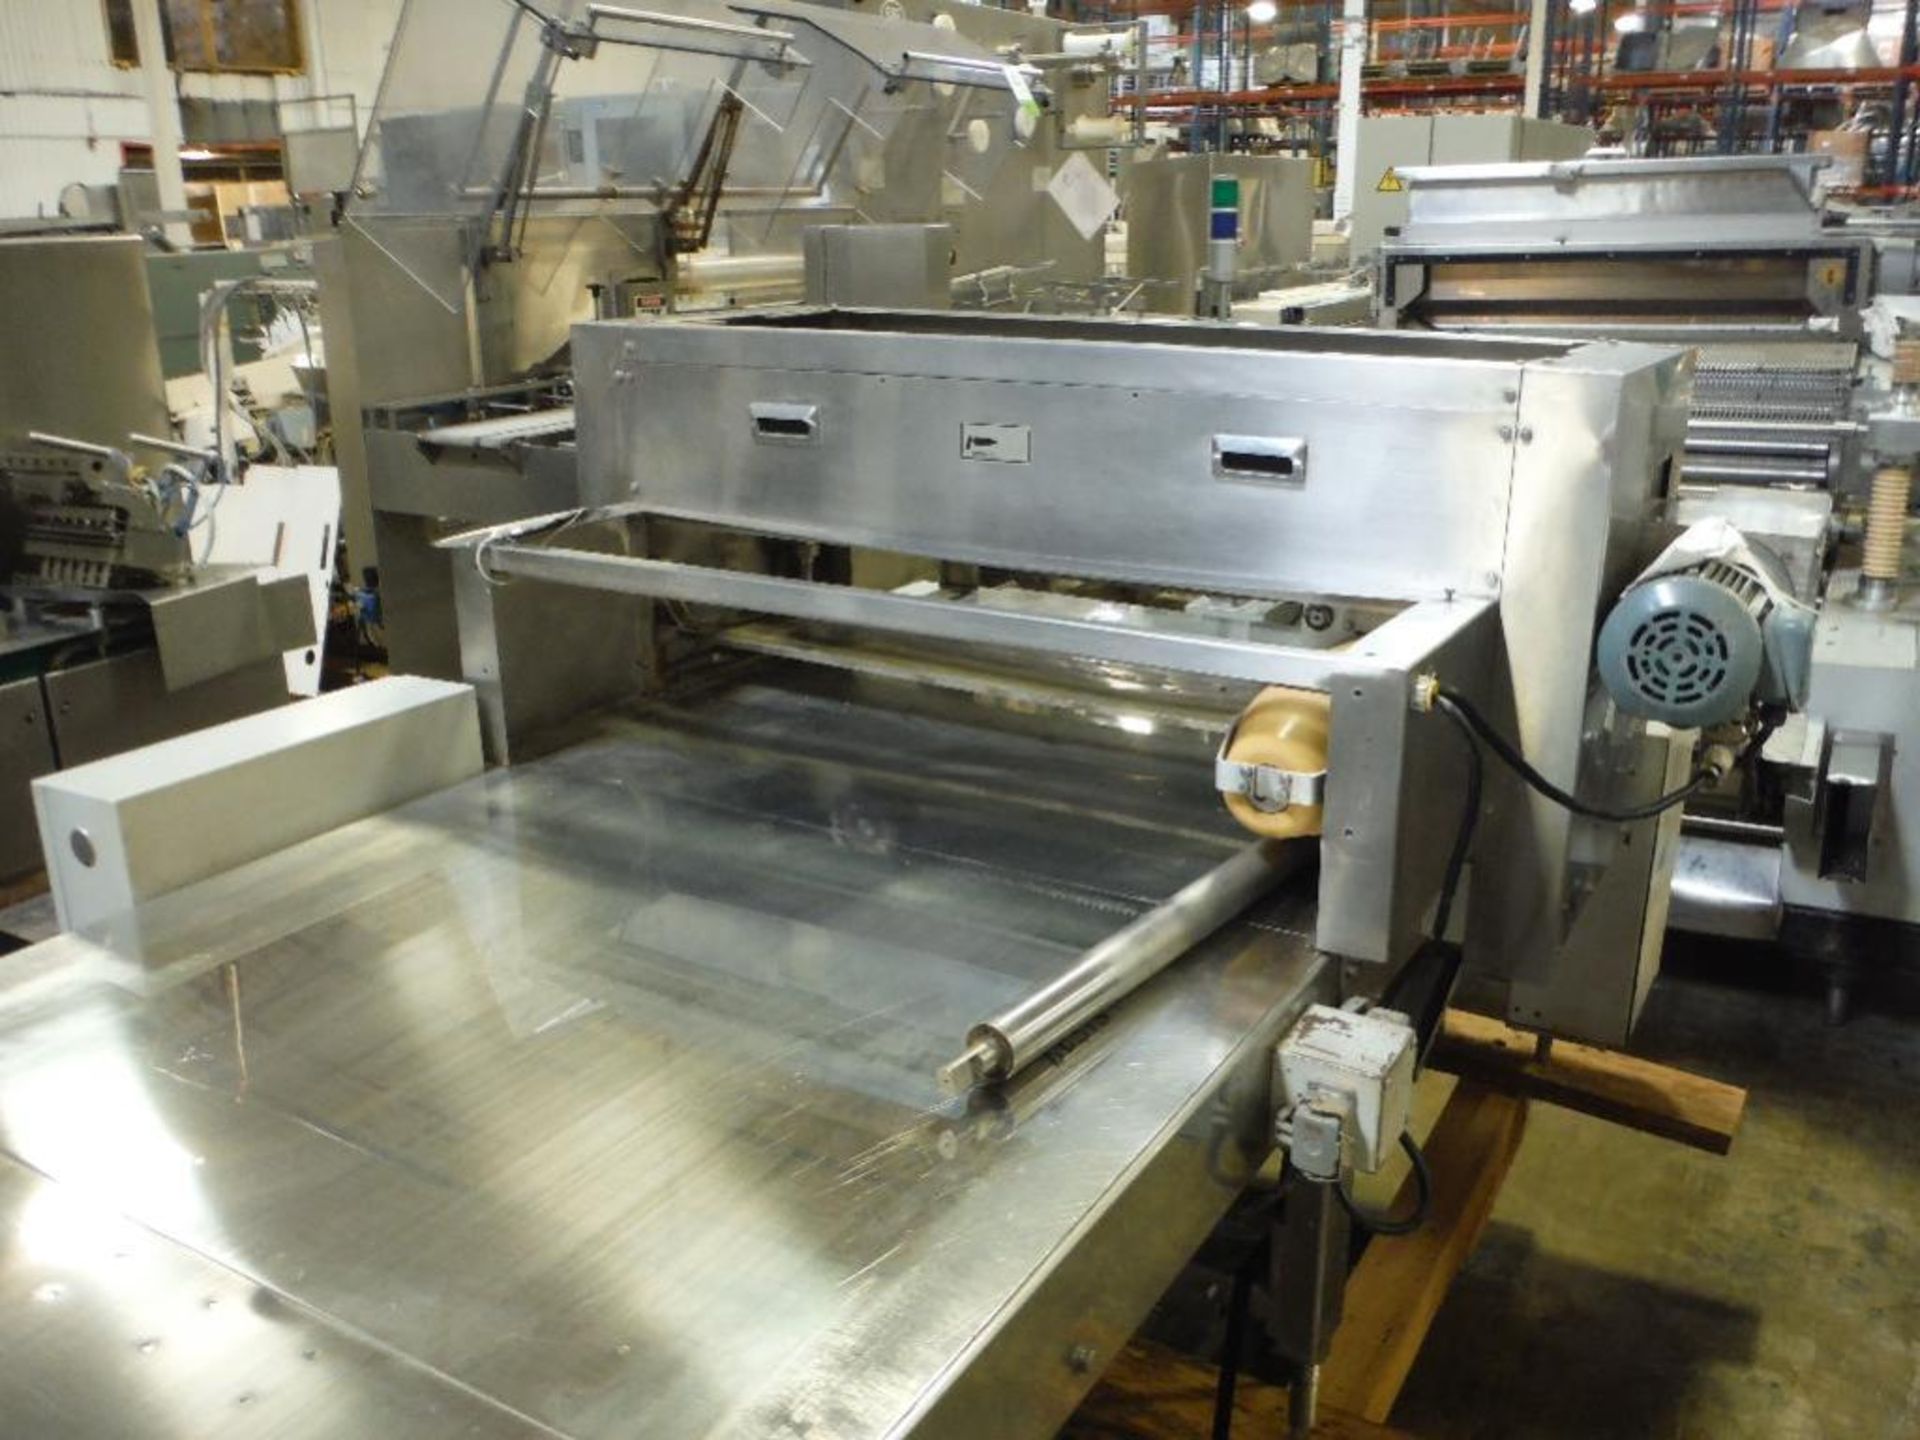 1991 Rheon sheeting conveyor, Model PC213, SN 00011, 180 in. long x 42 in. wide, with 1991 Rheon dou - Image 6 of 16